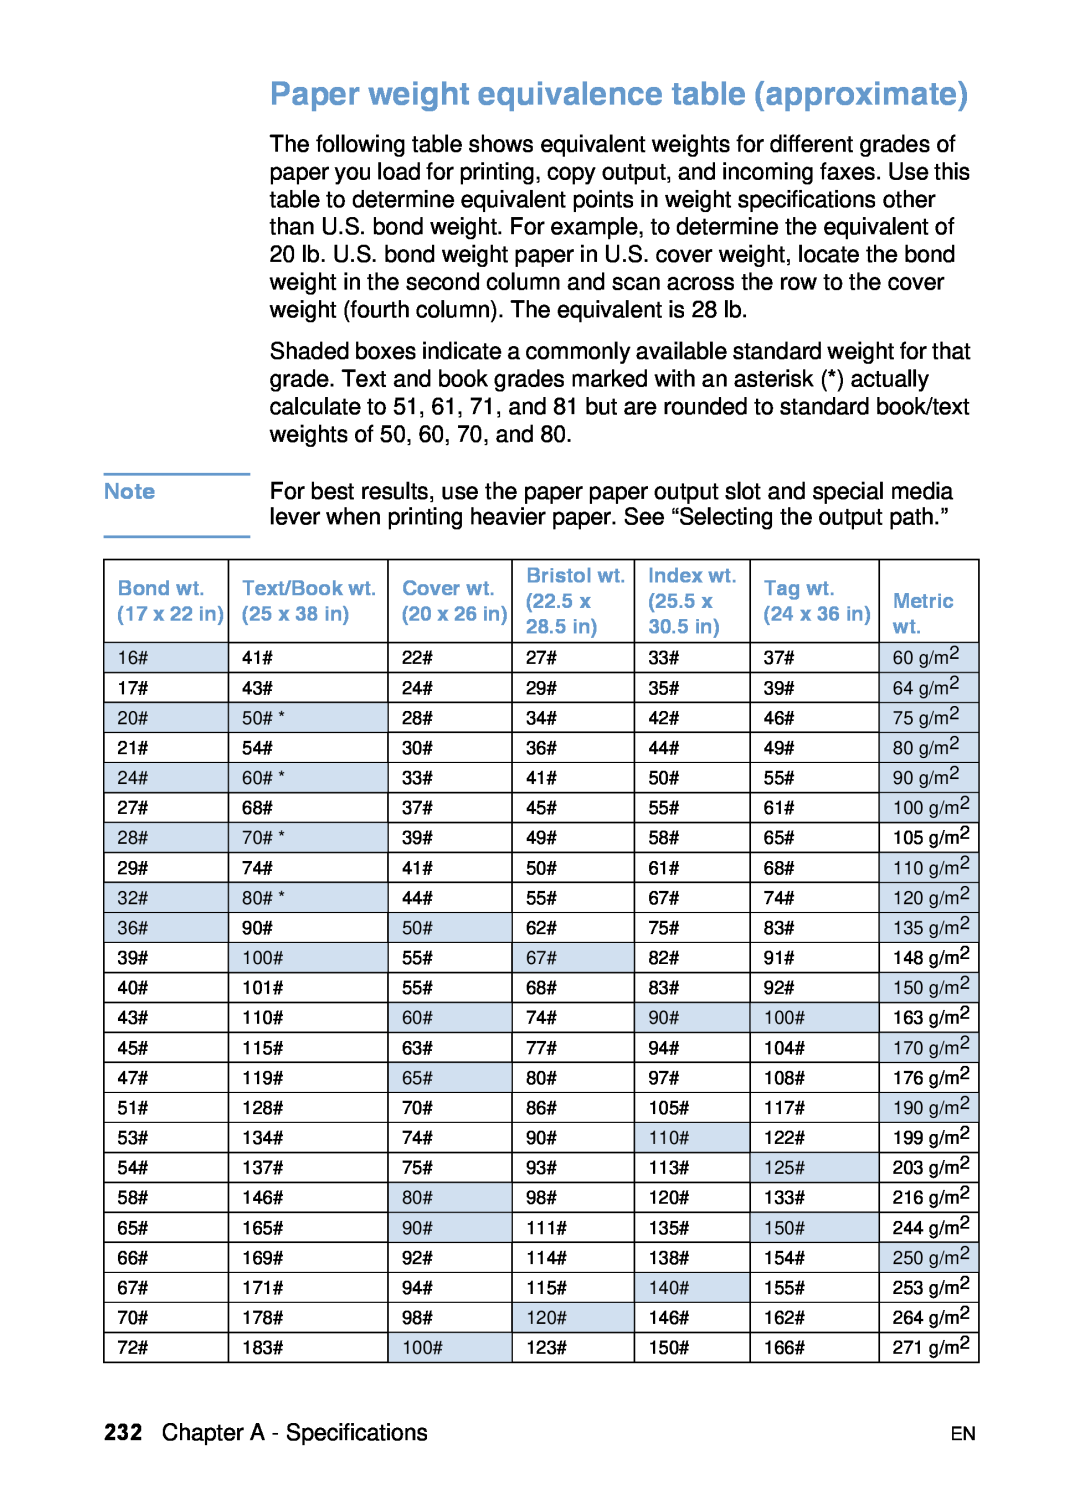 HP 3200 manual Paper weight equivalence table approximate 